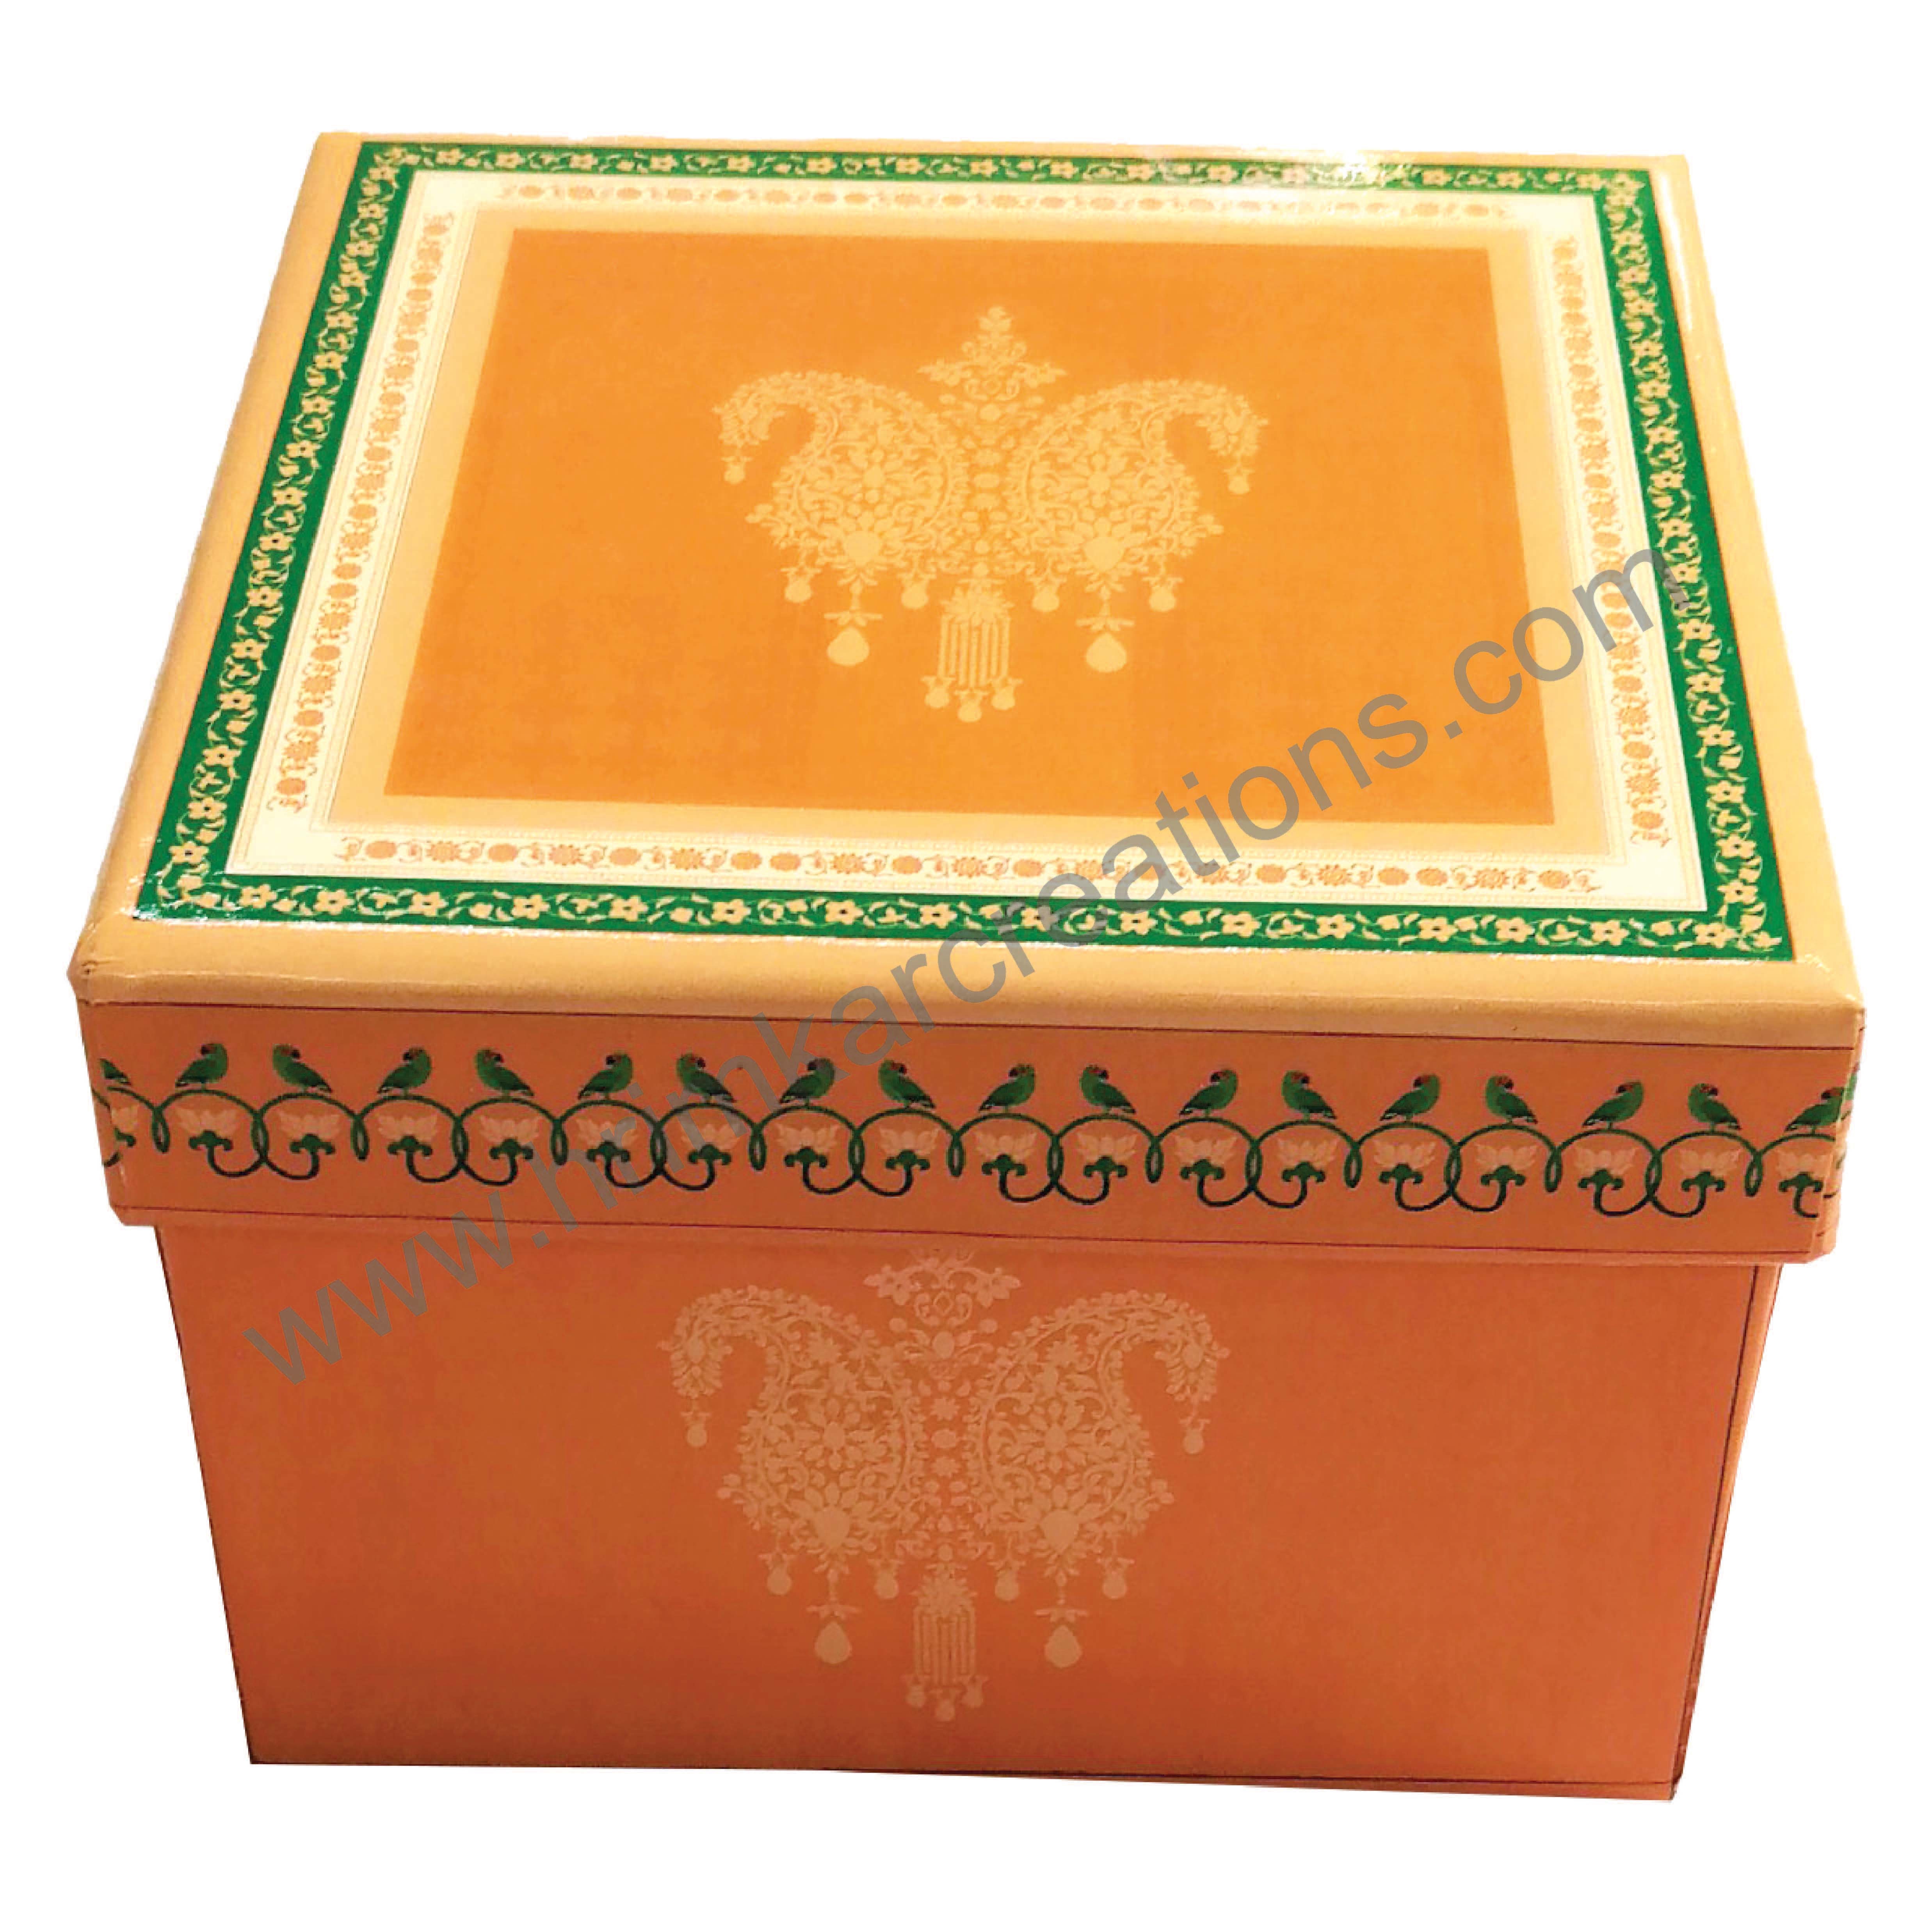 Spl Ladoo Covered 1 Pc And 2 Pc Box